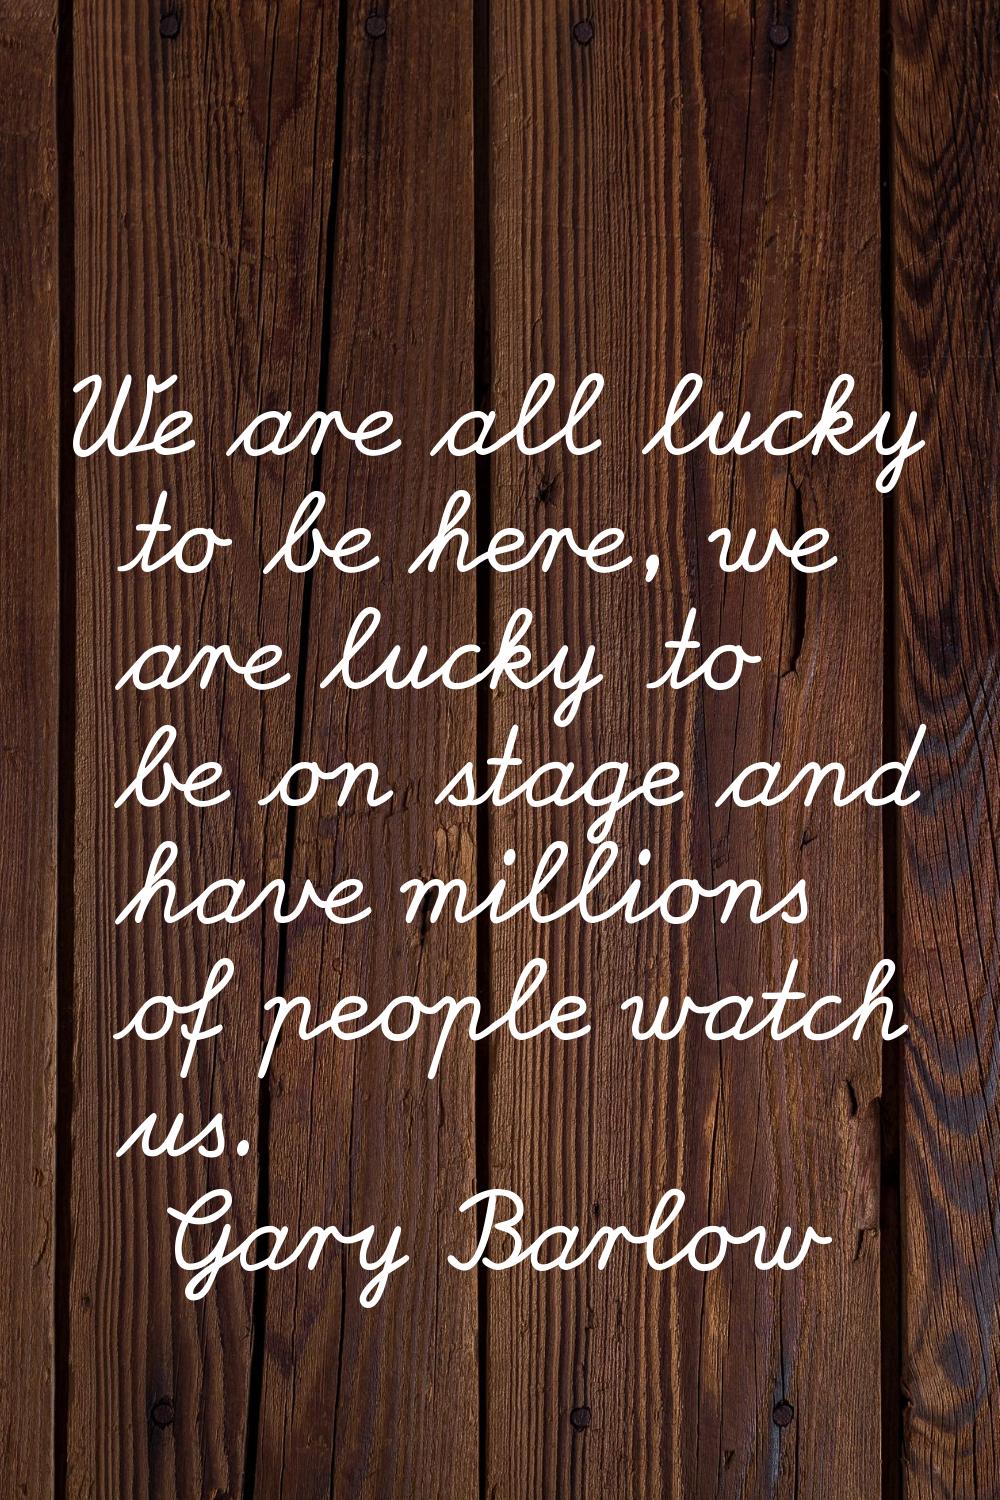 We are all lucky to be here, we are lucky to be on stage and have millions of people watch us.